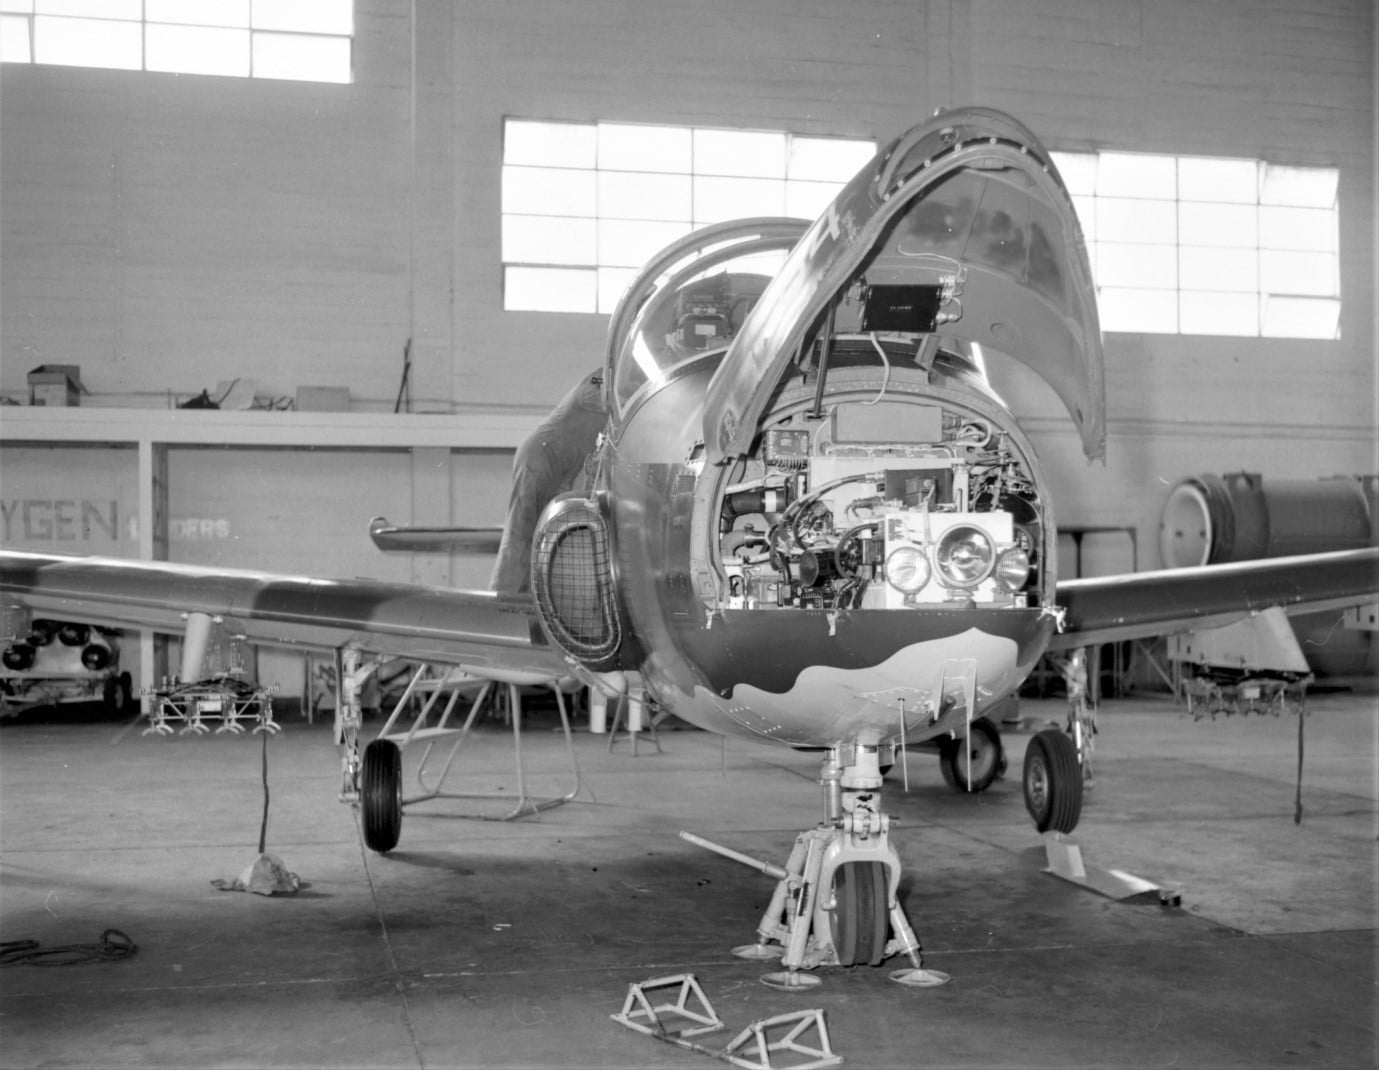 BAC Strikemaster Mk88 NZ6364 with the nose opened for easy access to radios and instrument power supplies – photo taken inside 14 Sqn’s No 2 Hangar at Ohakea – 1975 photo G2487a-75-1